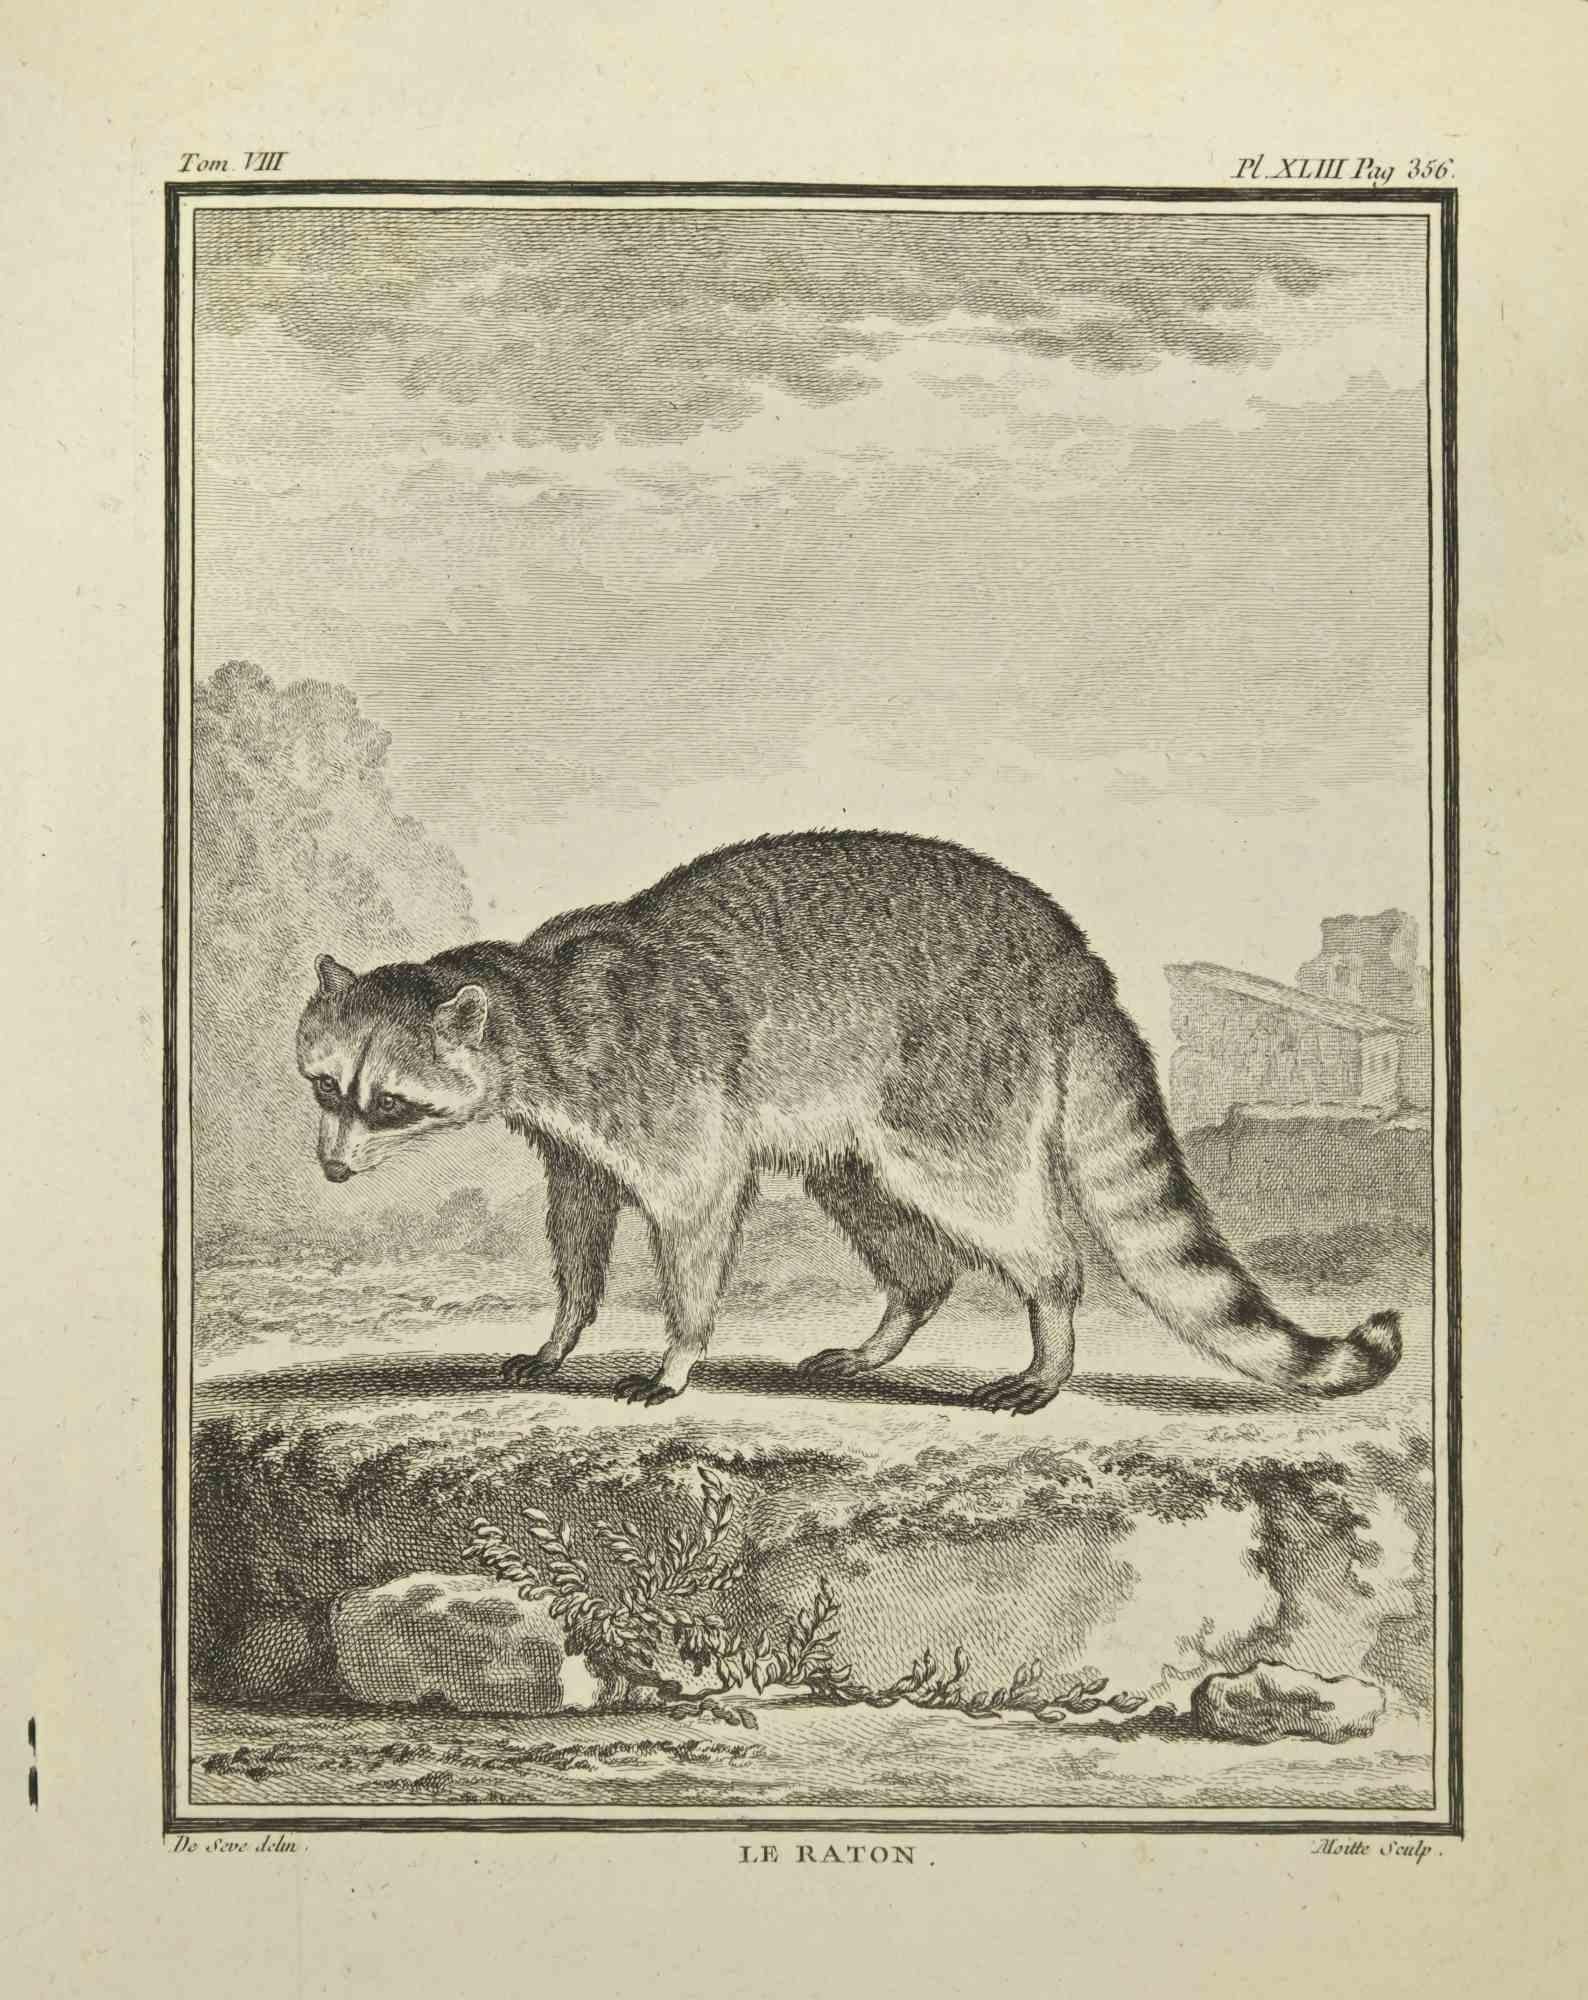 Le Raton - Etching by Jean Gullaume Moitte - 1771